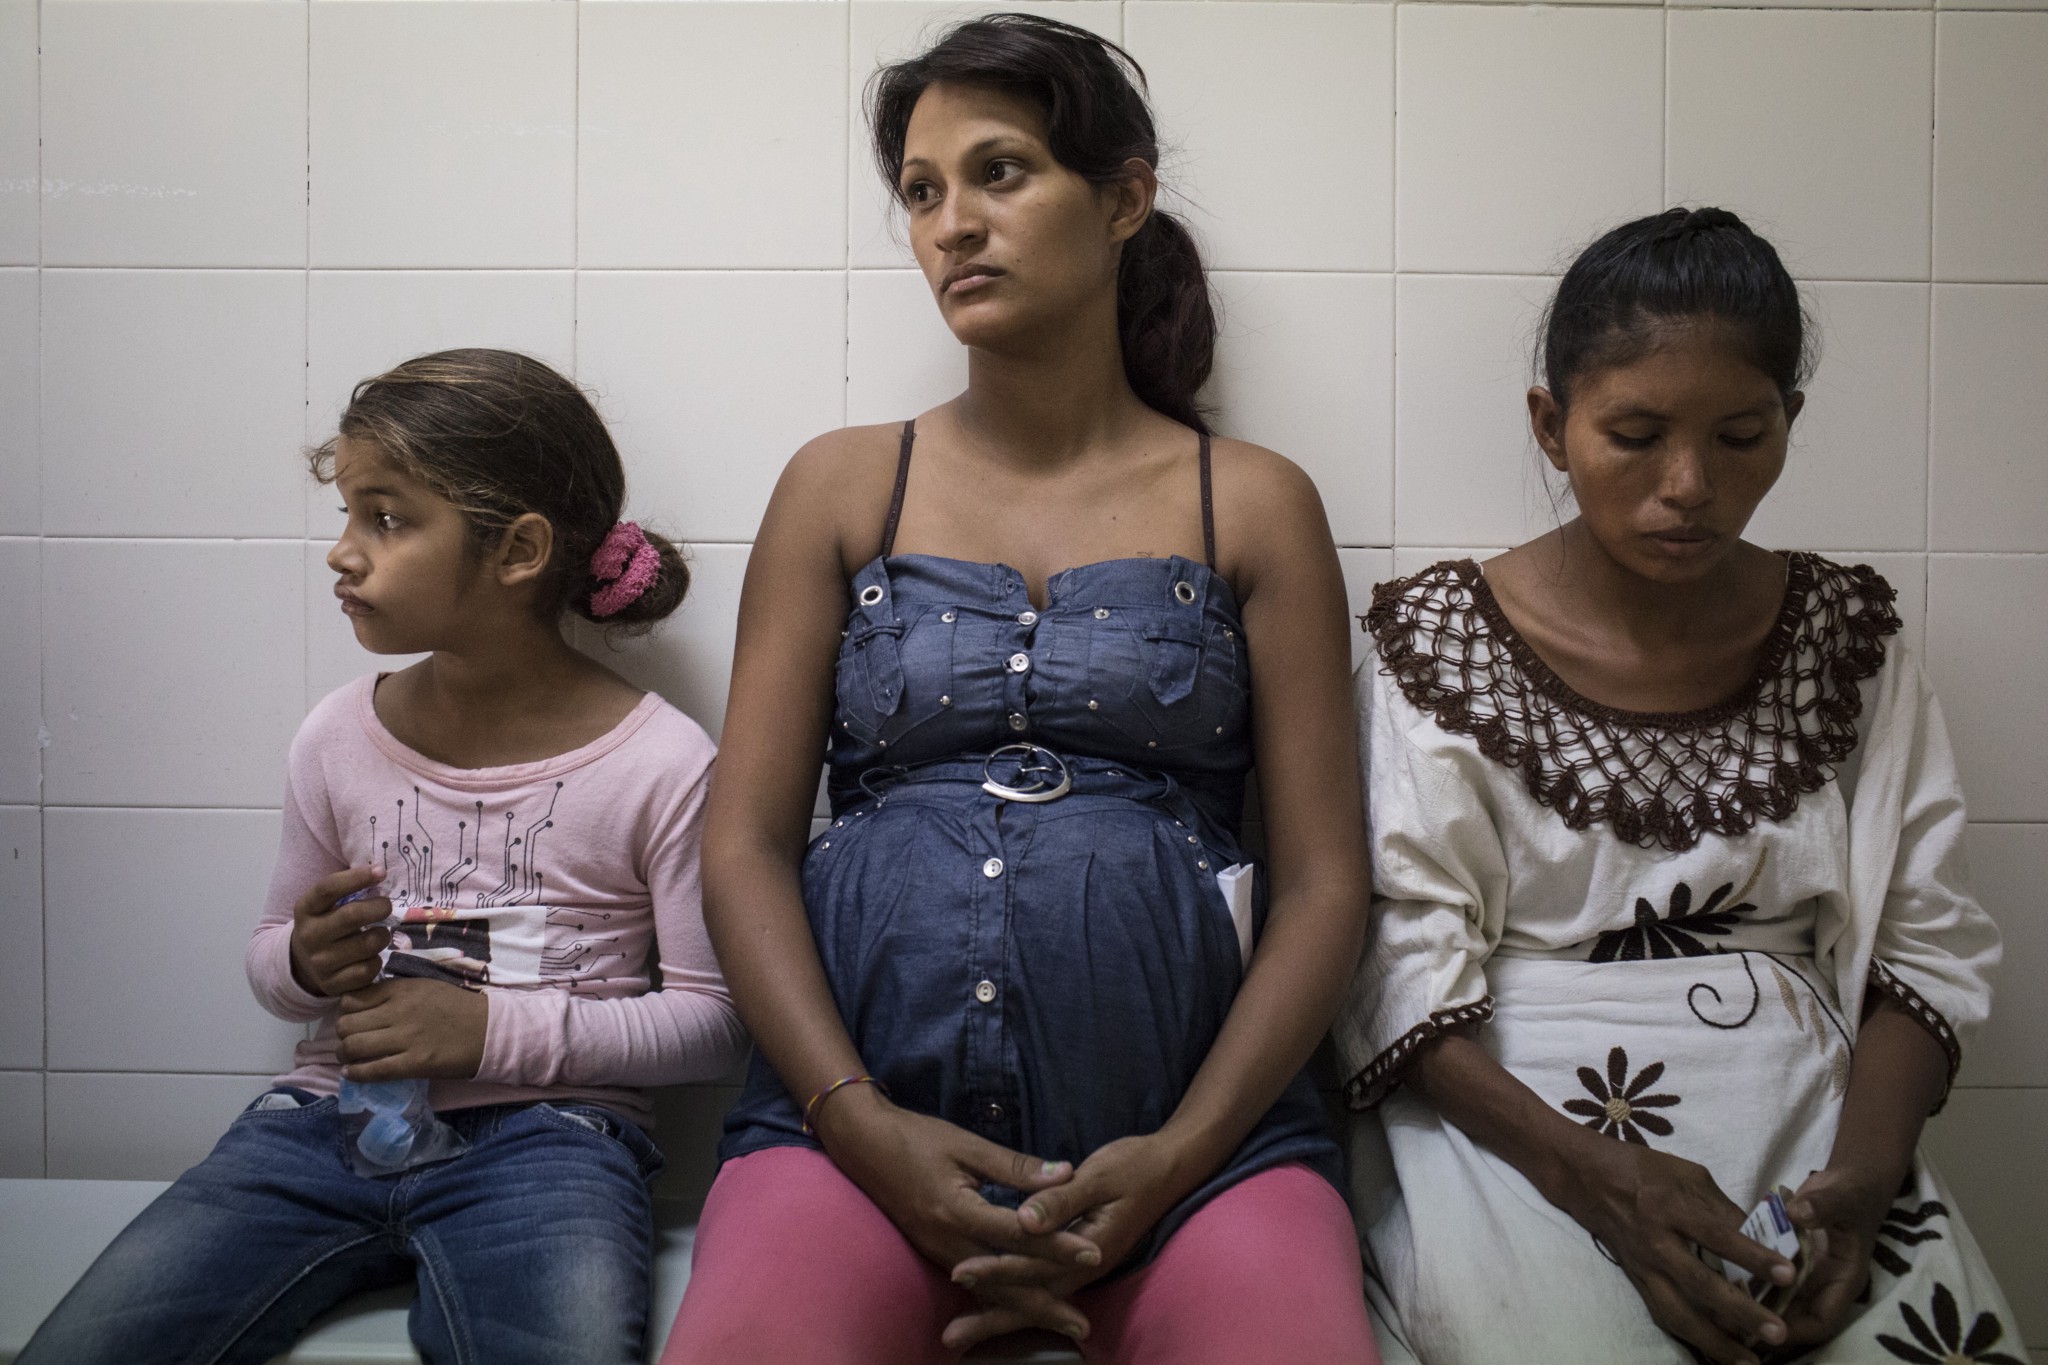 Americares clinics in Colombia provide free health care to Venezuelans who have fled their country. About one-fifth of the patients are seeking pre-natal care. Photo by Nicolo Filippo Rosso.